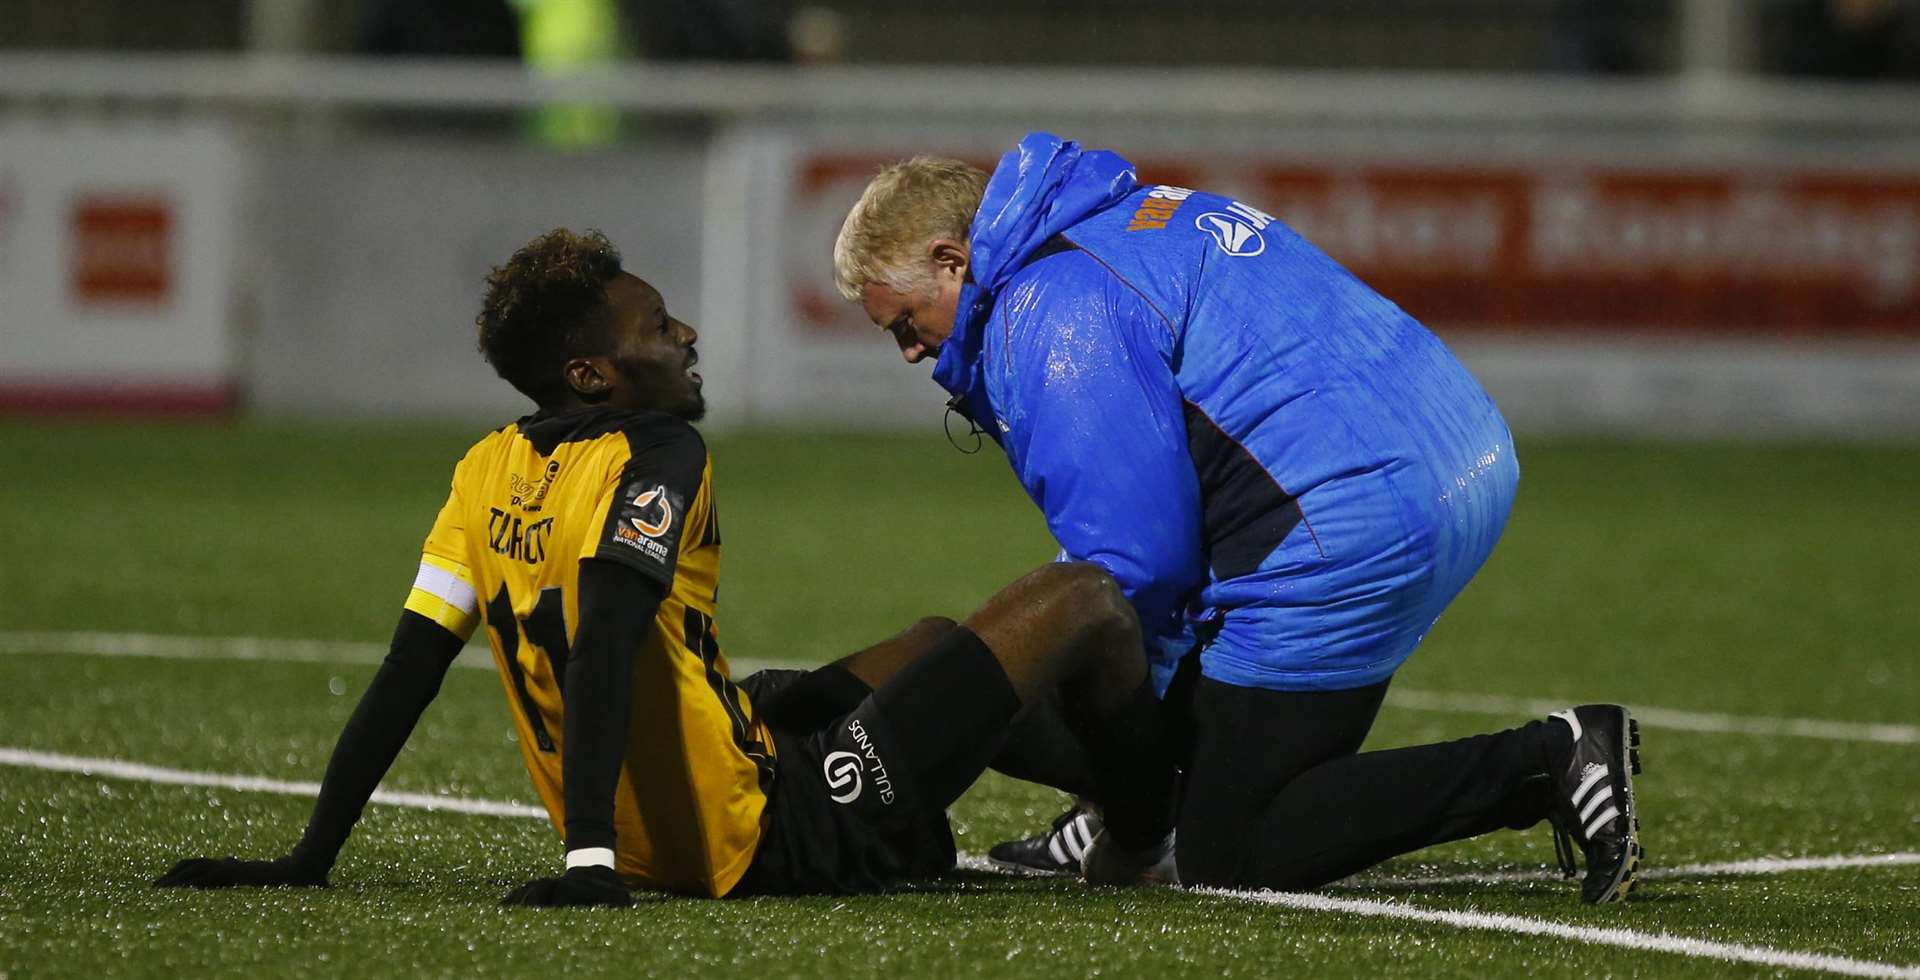 Maidstone striker Blair Turgott needs attention before leaving the field Picture: Andy Jones